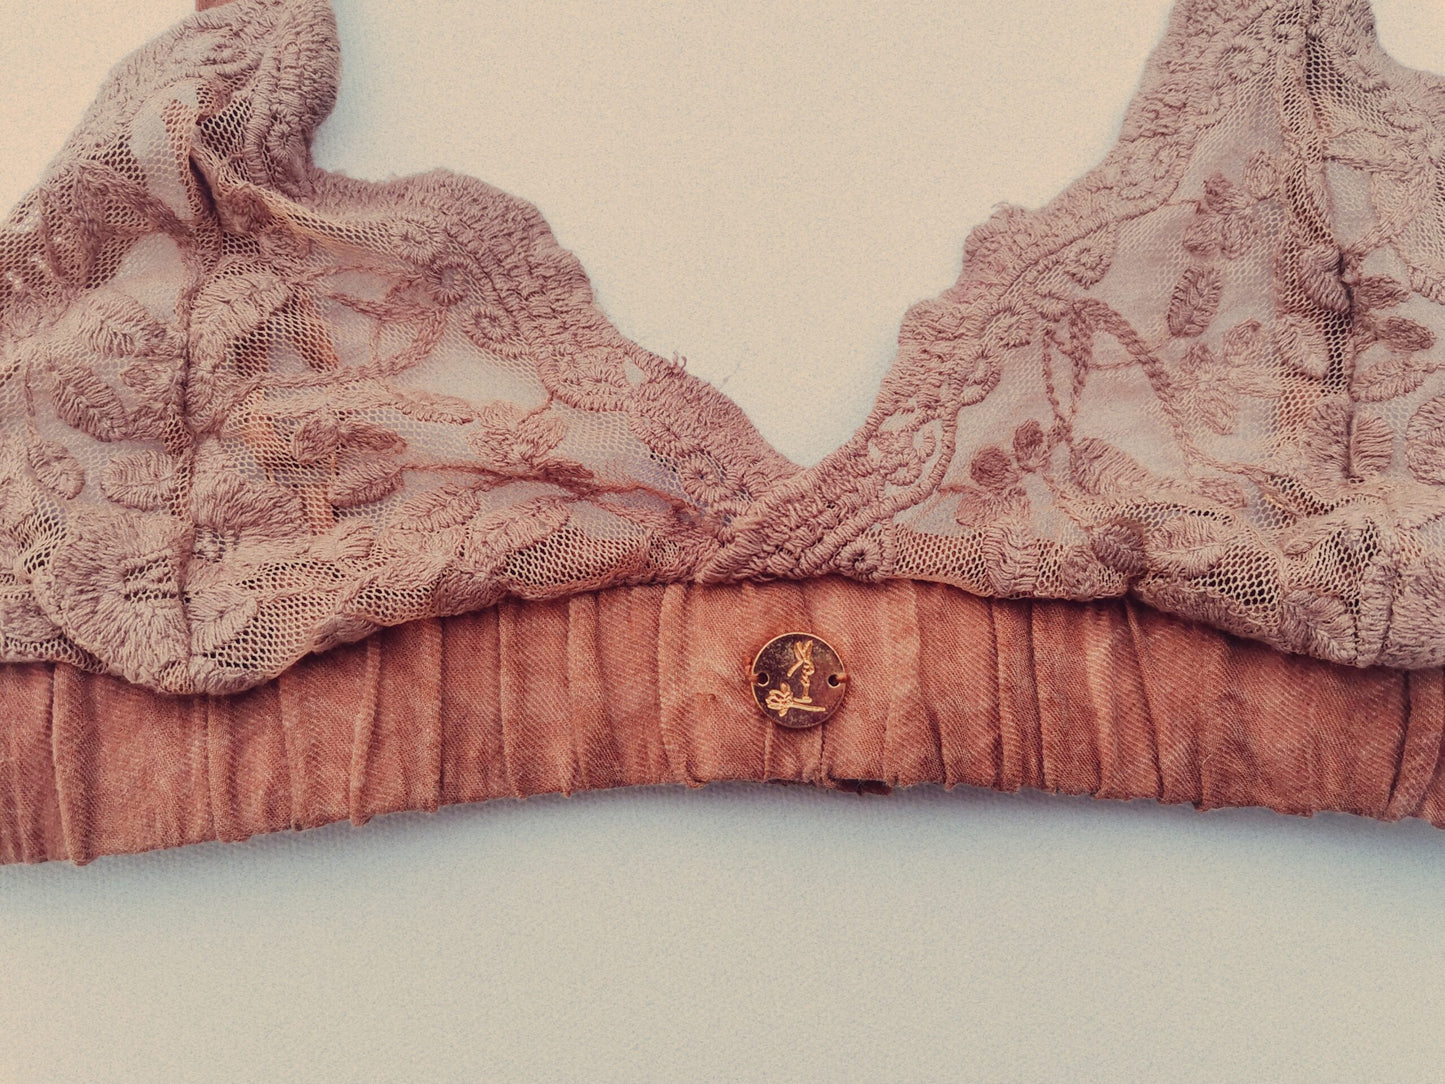 Delicate Light pink ladies bralet made of lace and linen fabrics. The item is designed and manufactured by South African clothing designers.